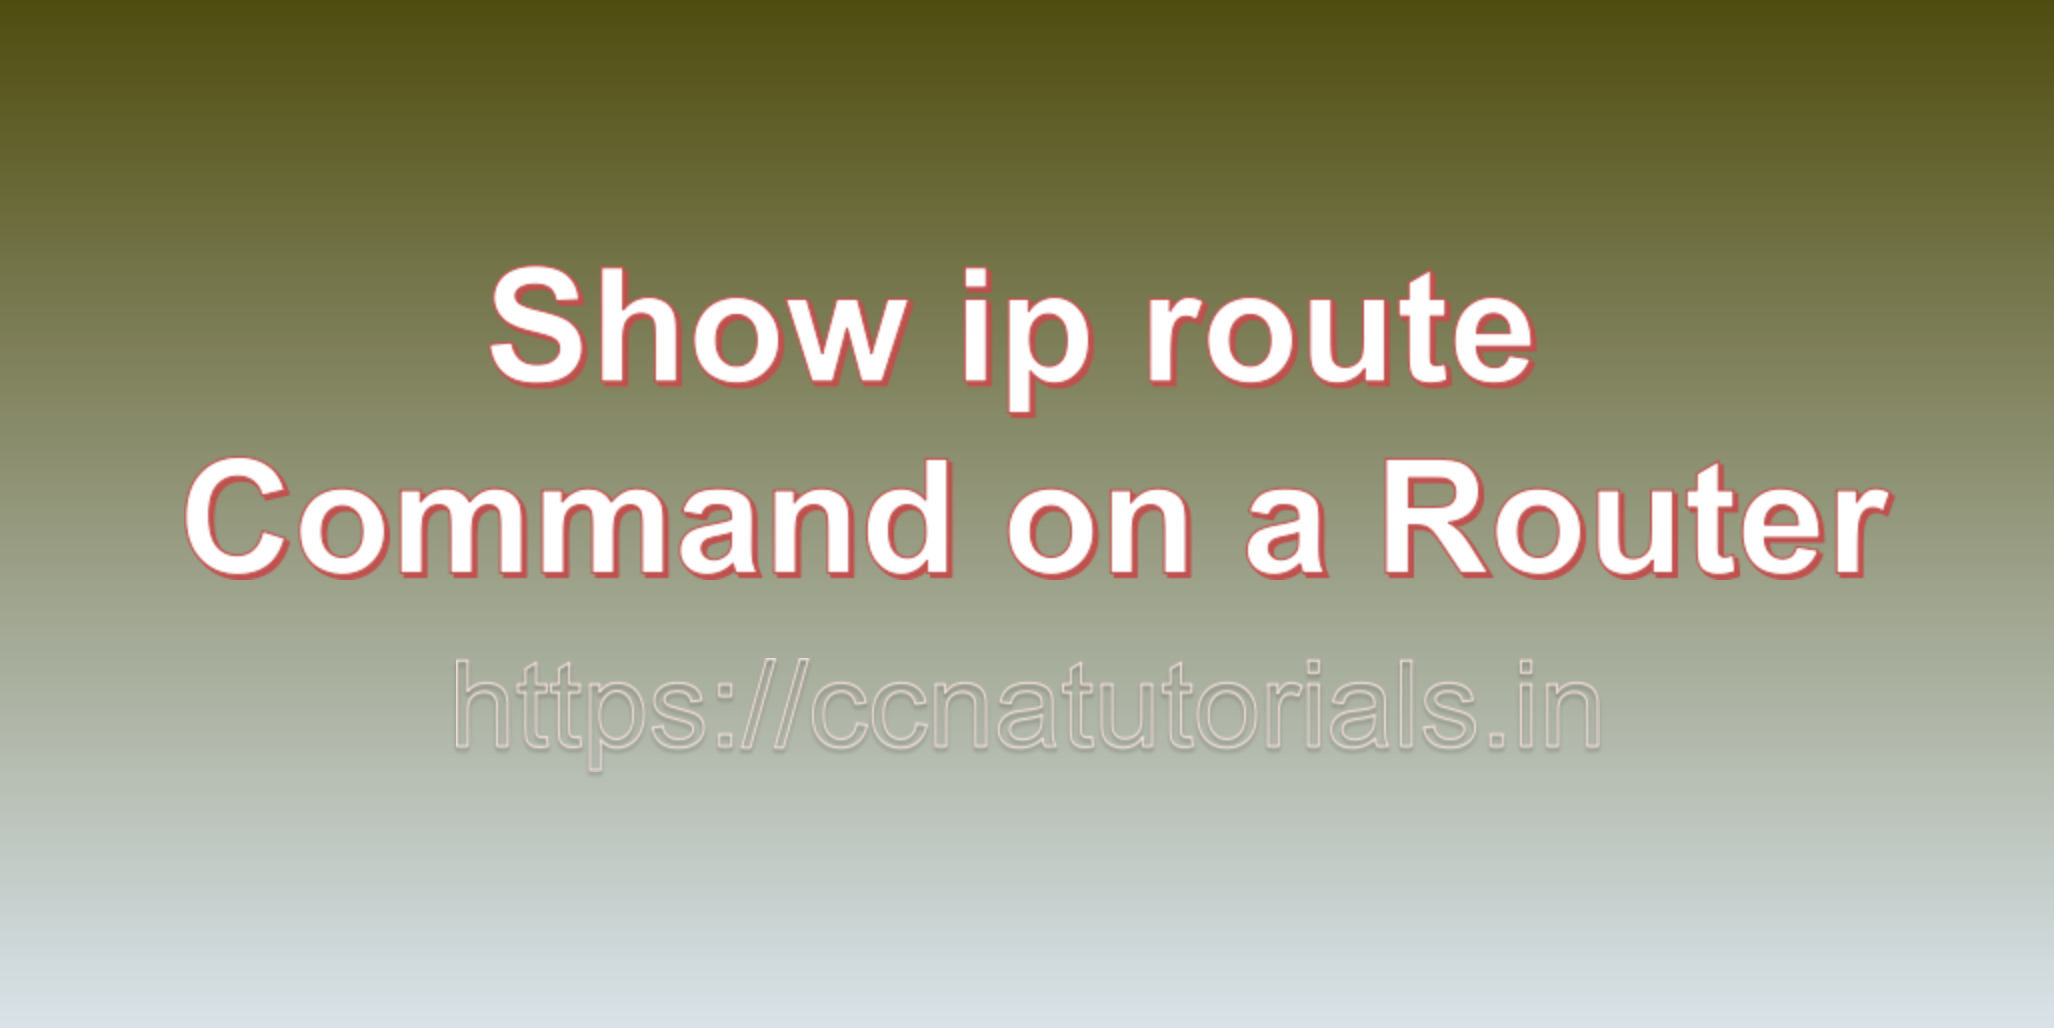 show ip route Command on a Router, ccna, ccna tutorials